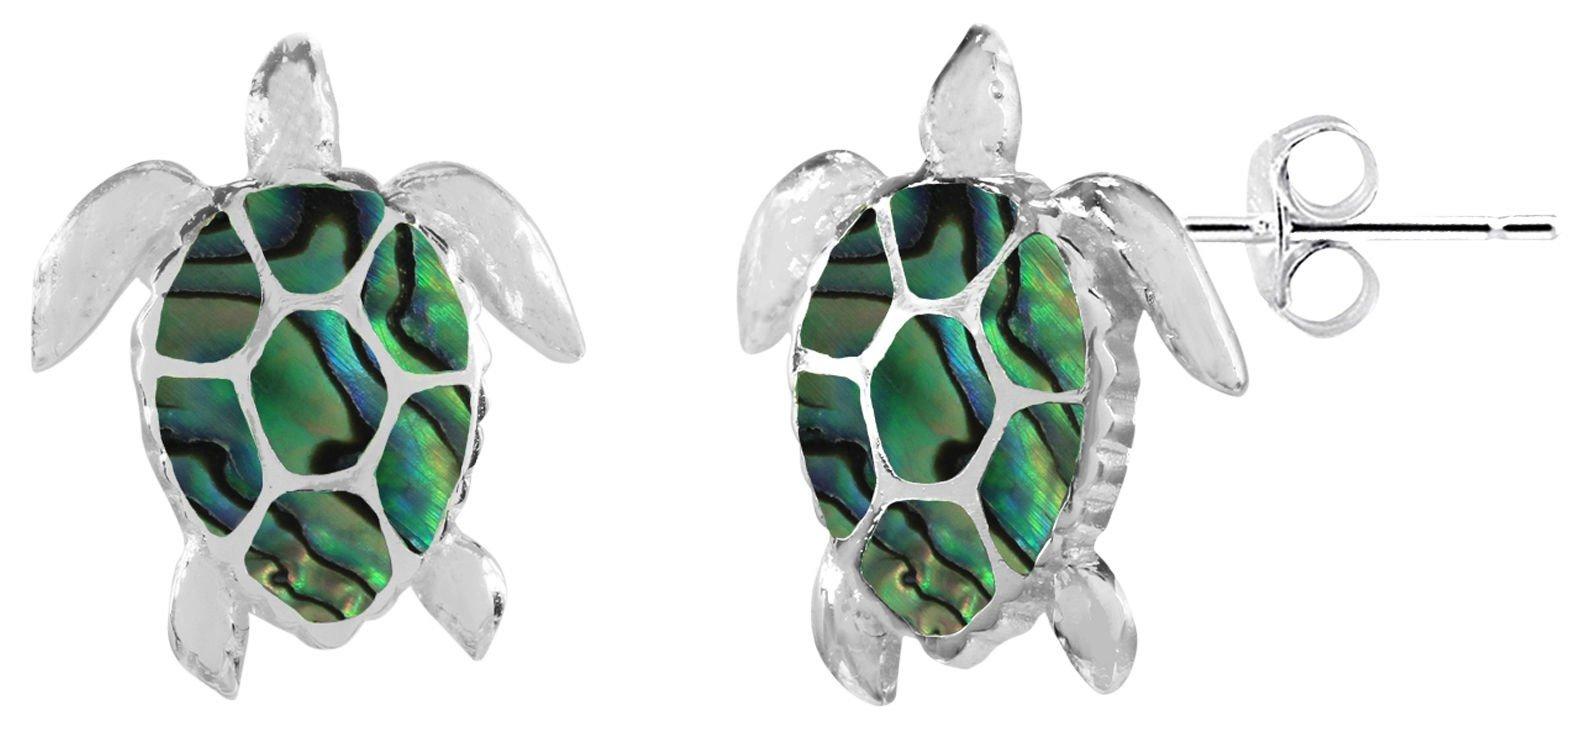 Beach Chic Silver Plated Sea Turtle Abalone Earrings